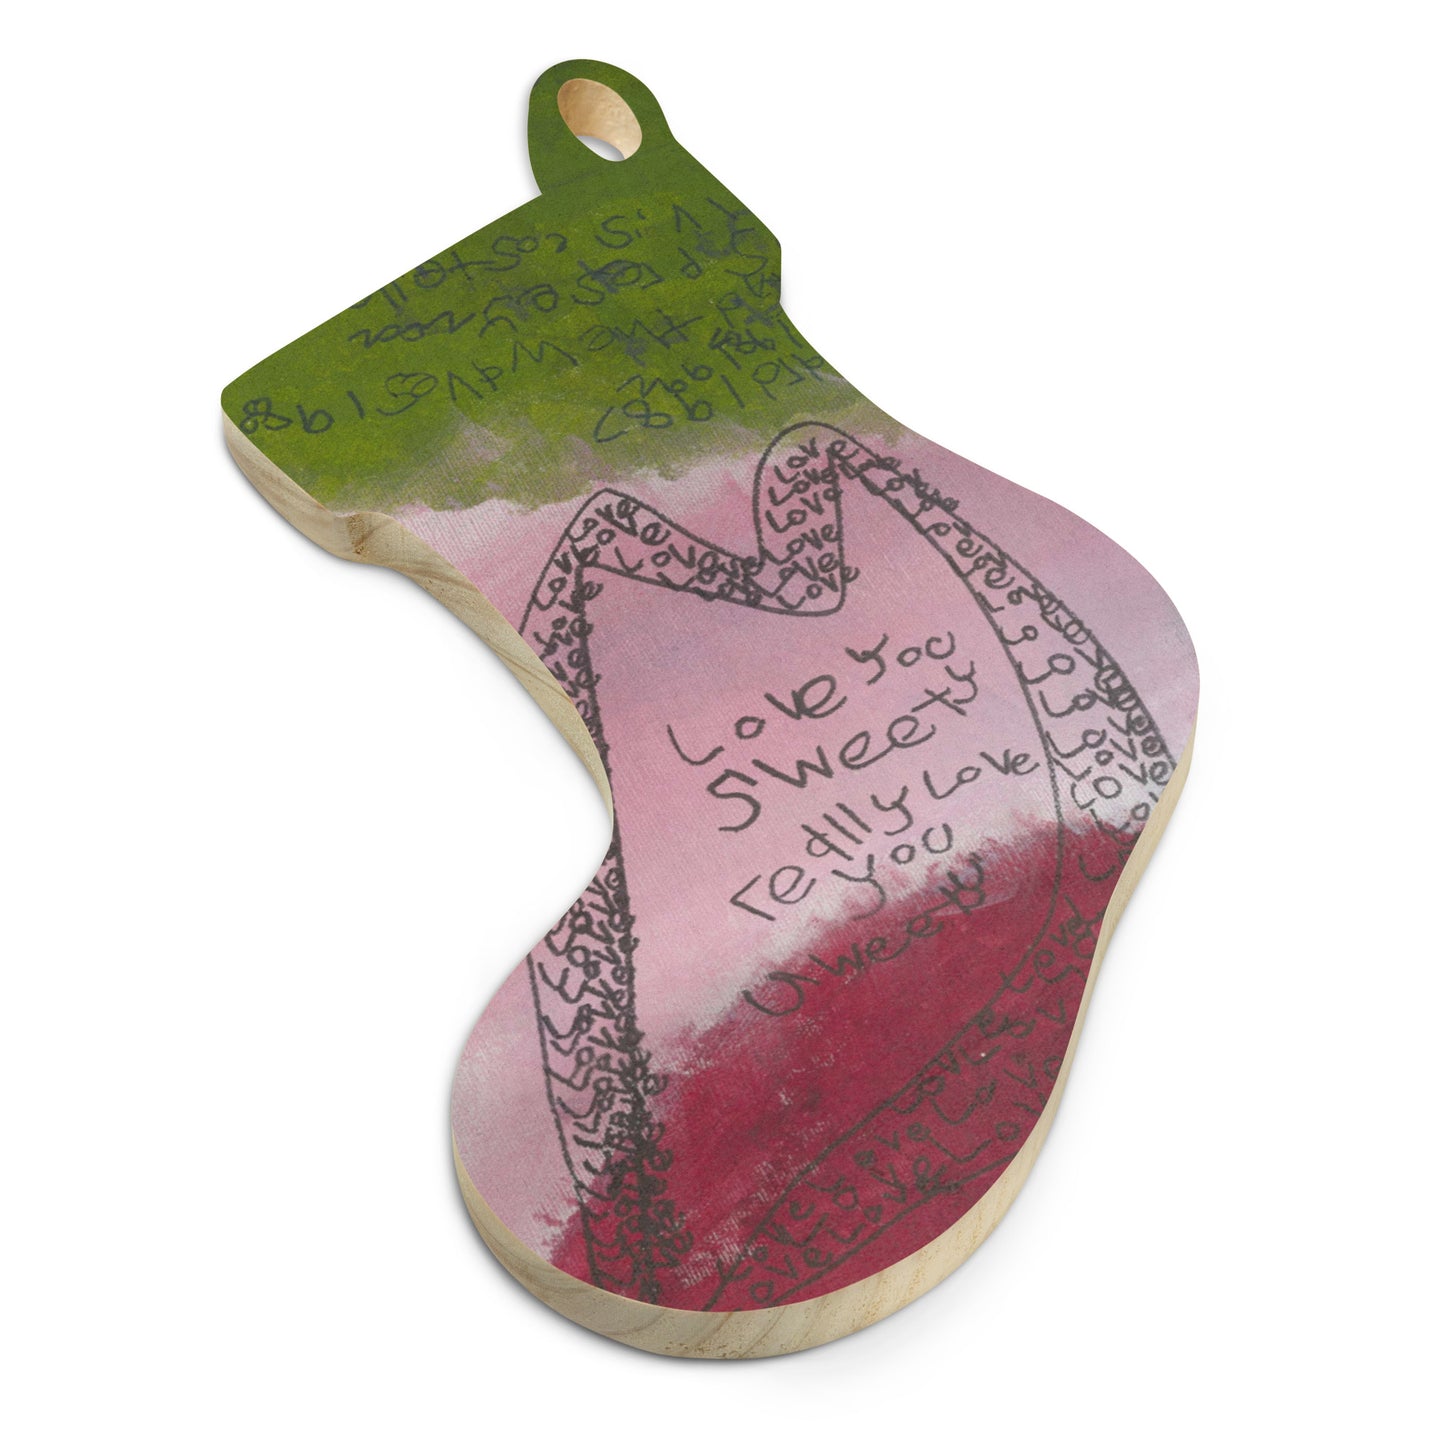 Wooden ornament & magnet - "Love and True Love"